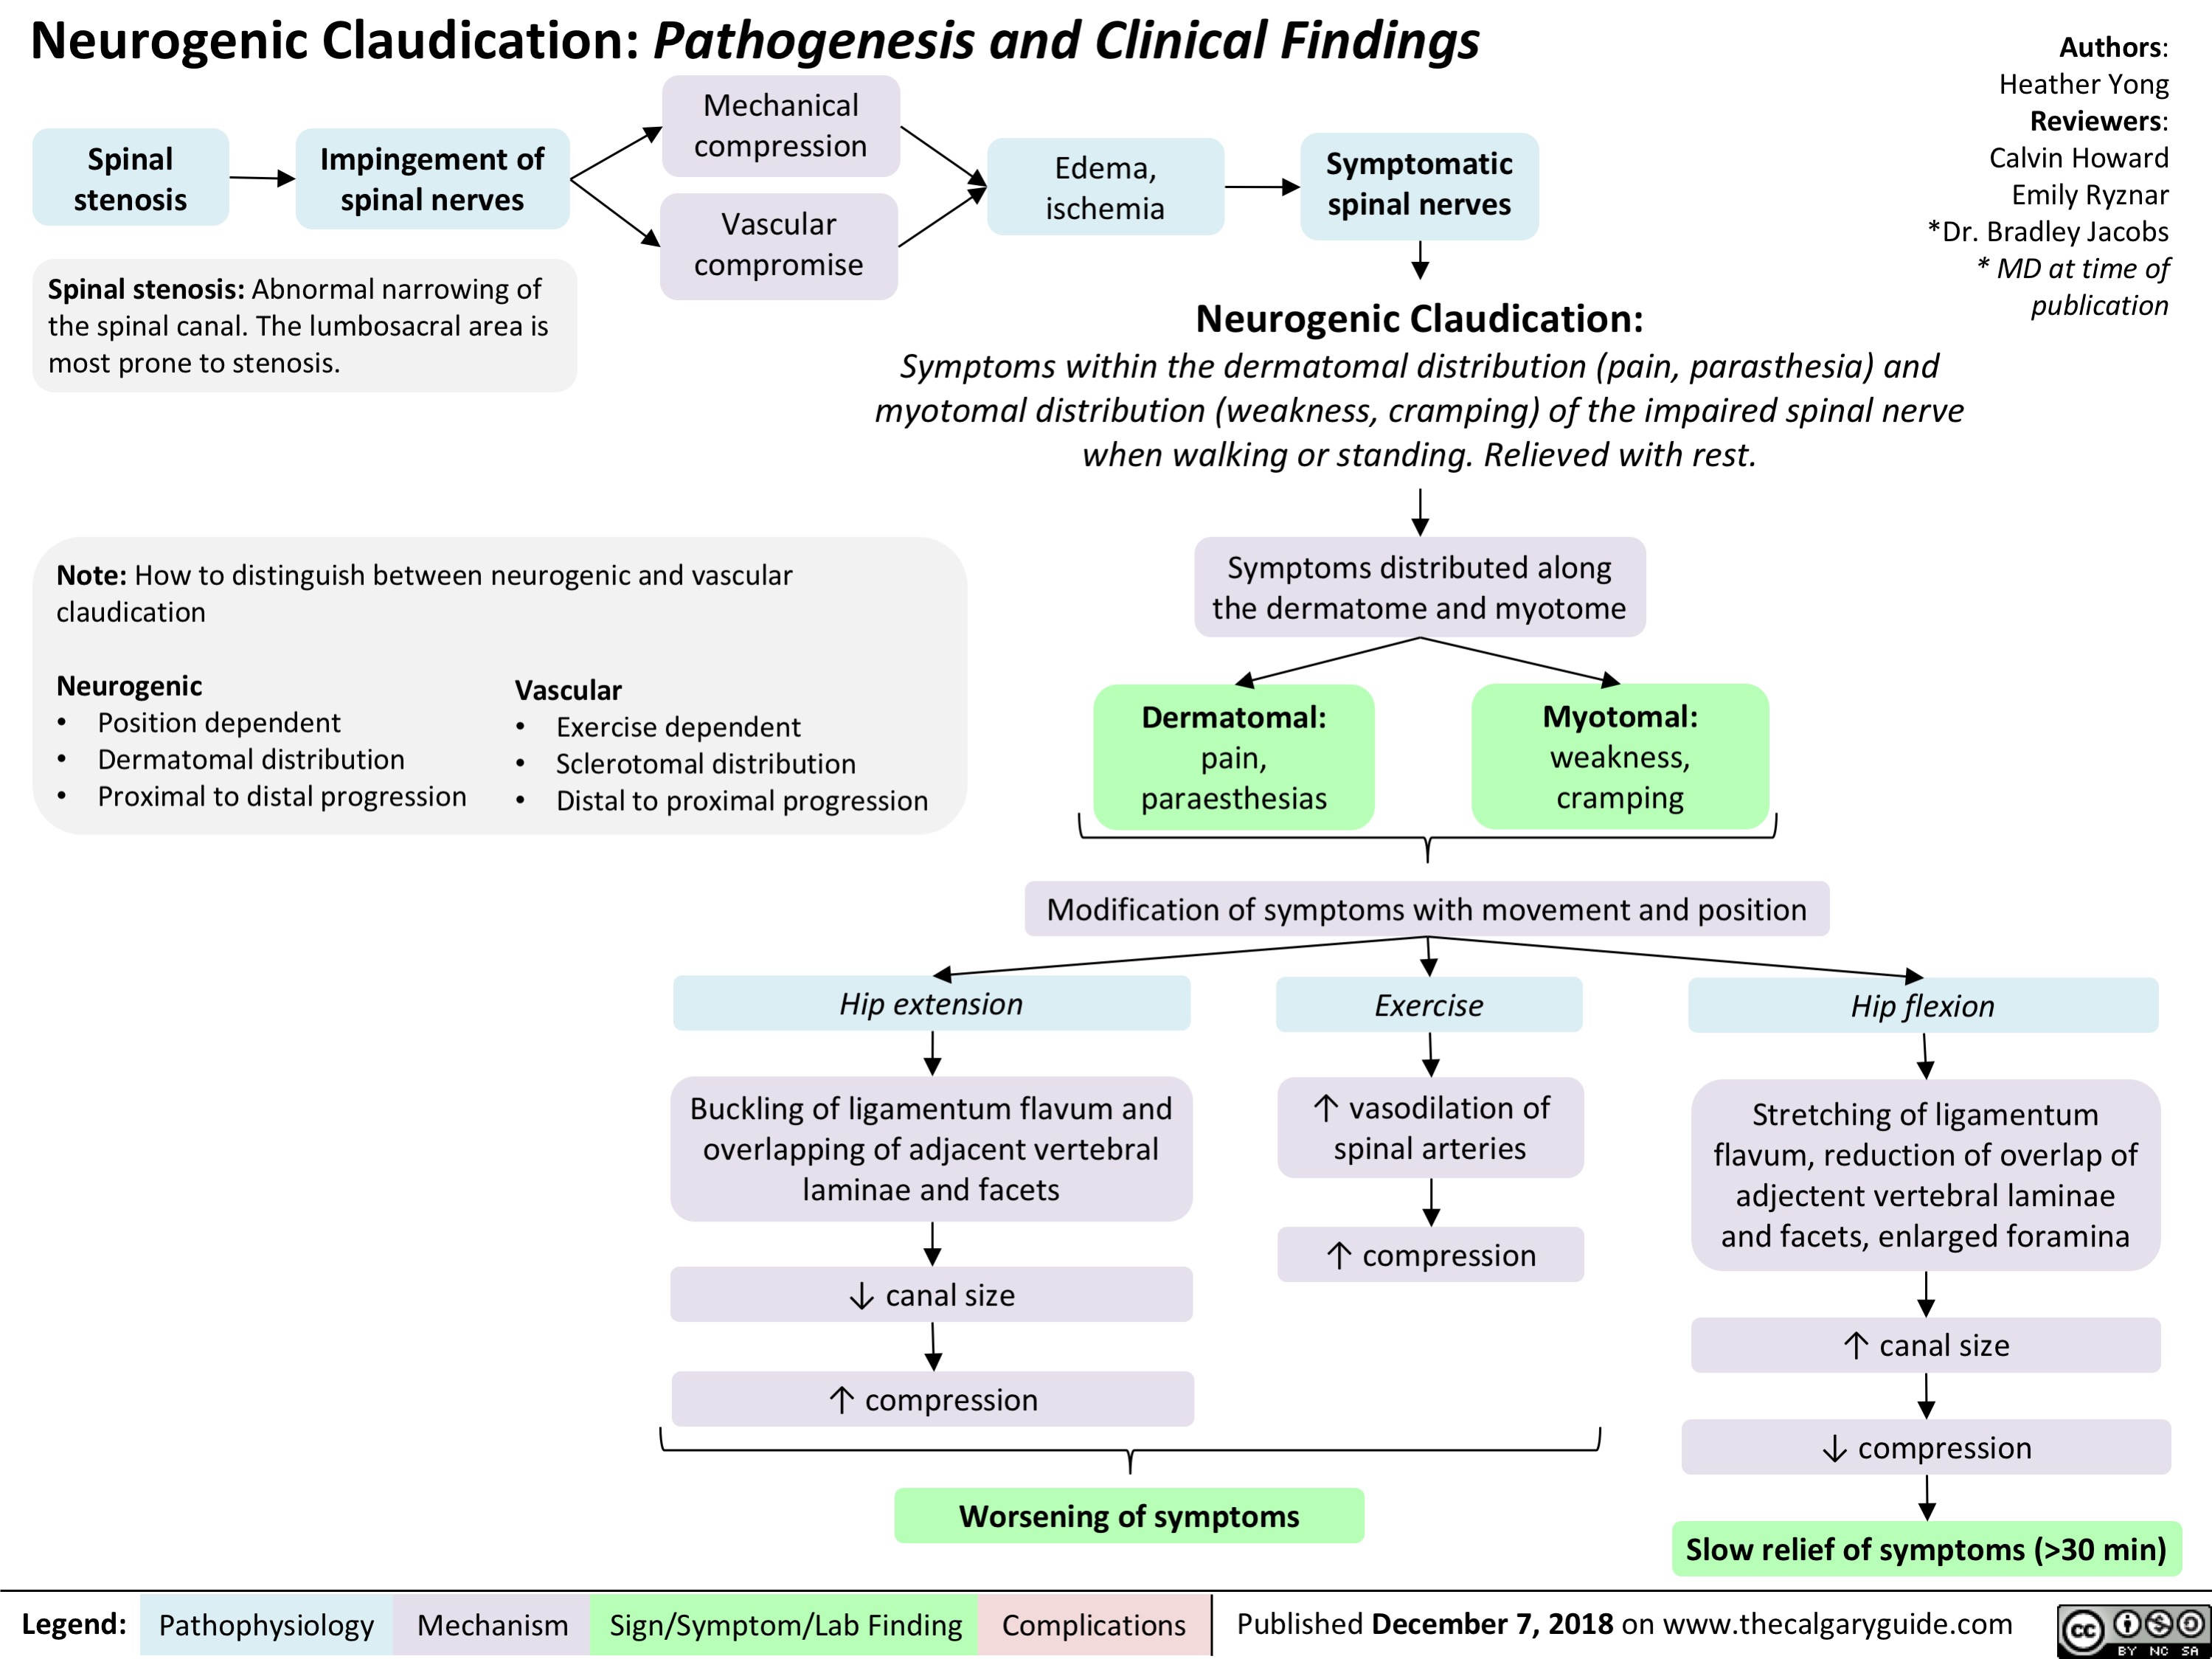 What medication is used for neurogenic claudication?